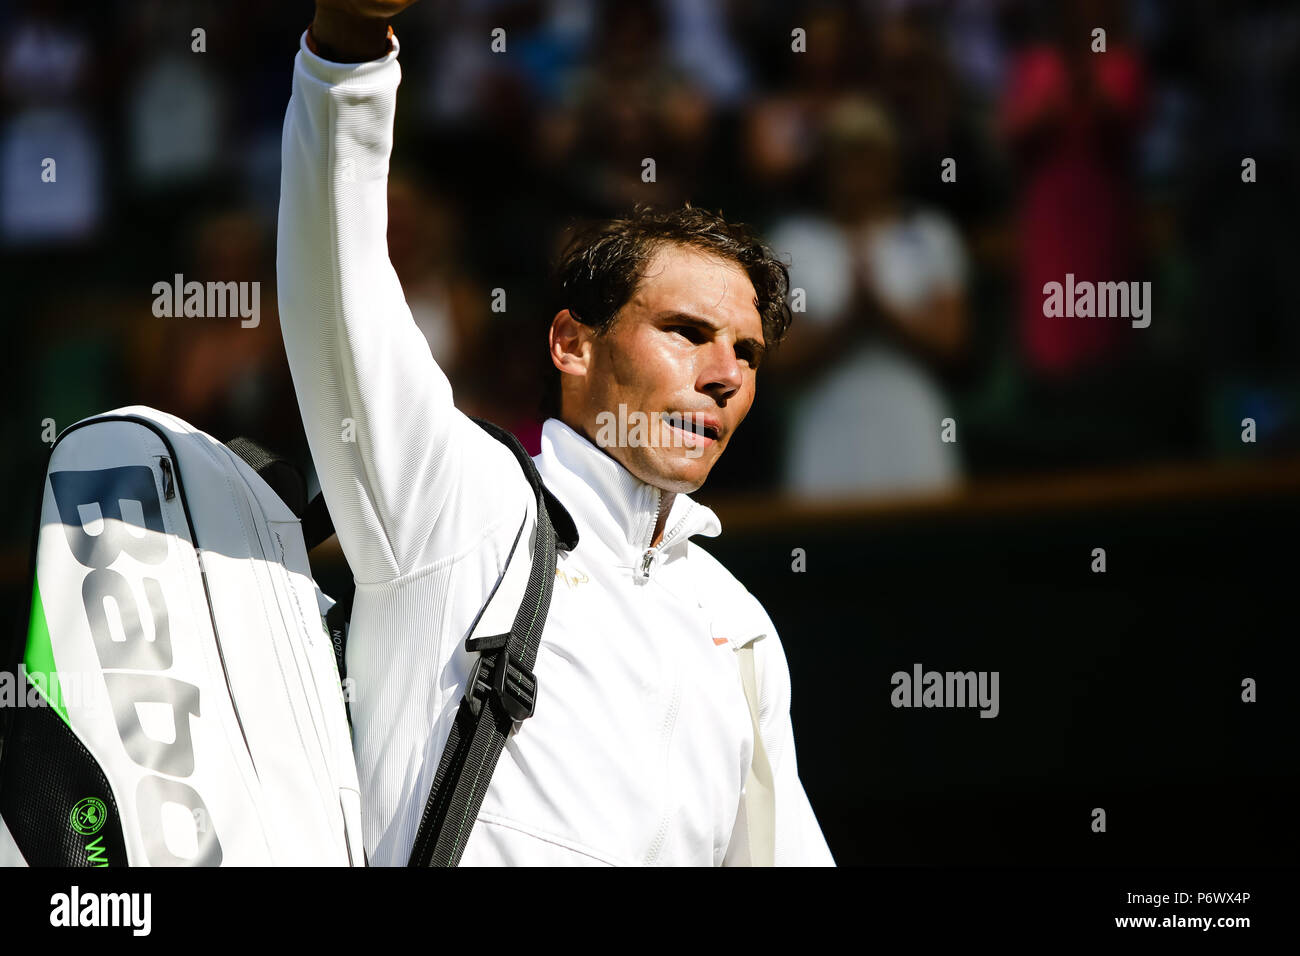 London, UK, 3rd July 2018: Rafael Nadal of Spain leaves the Centre Court after his 1st round match Day 2 at the Wimbledon Tennis Championships 2018 at the All England Lawn Tennis and Croquet Club in London. Credit: Frank Molter/Alamy Live news Stock Photo